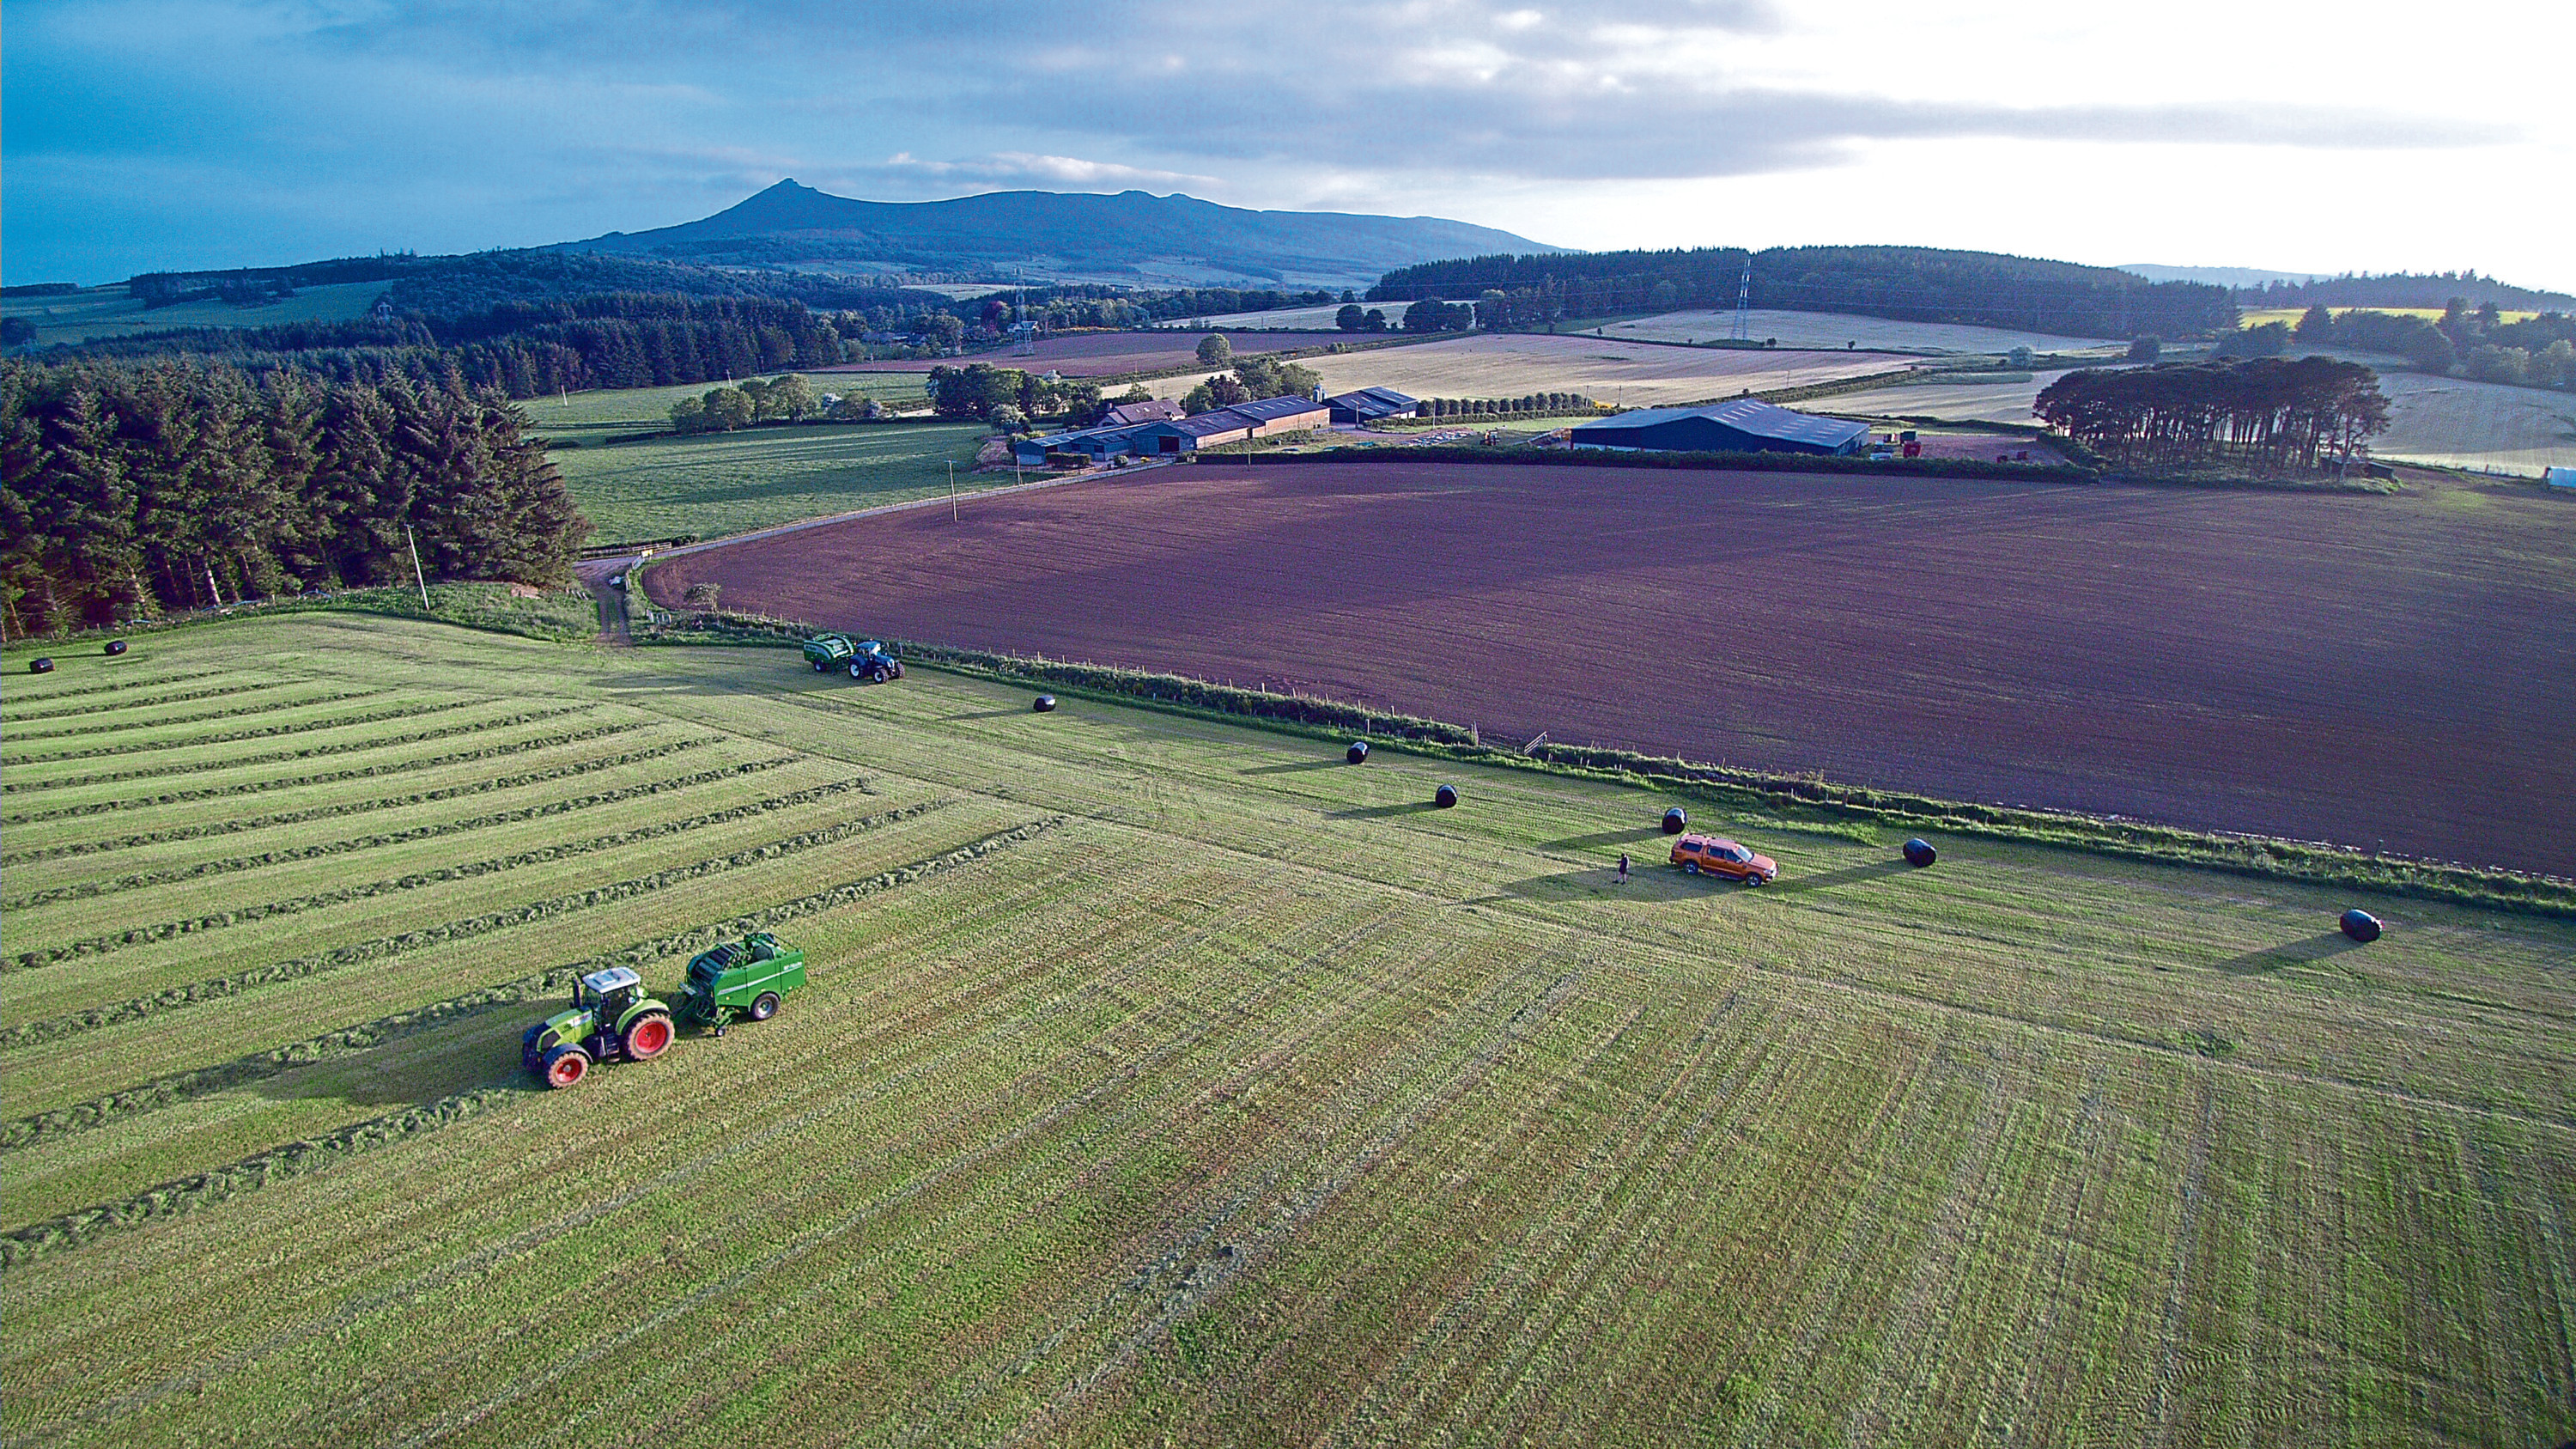 Gregor Ingram sent in this picture of silage making at Logie Durno Farm, near Inverurie. Contractor Will Youngson is chopping silage for a pit to feed sheep.